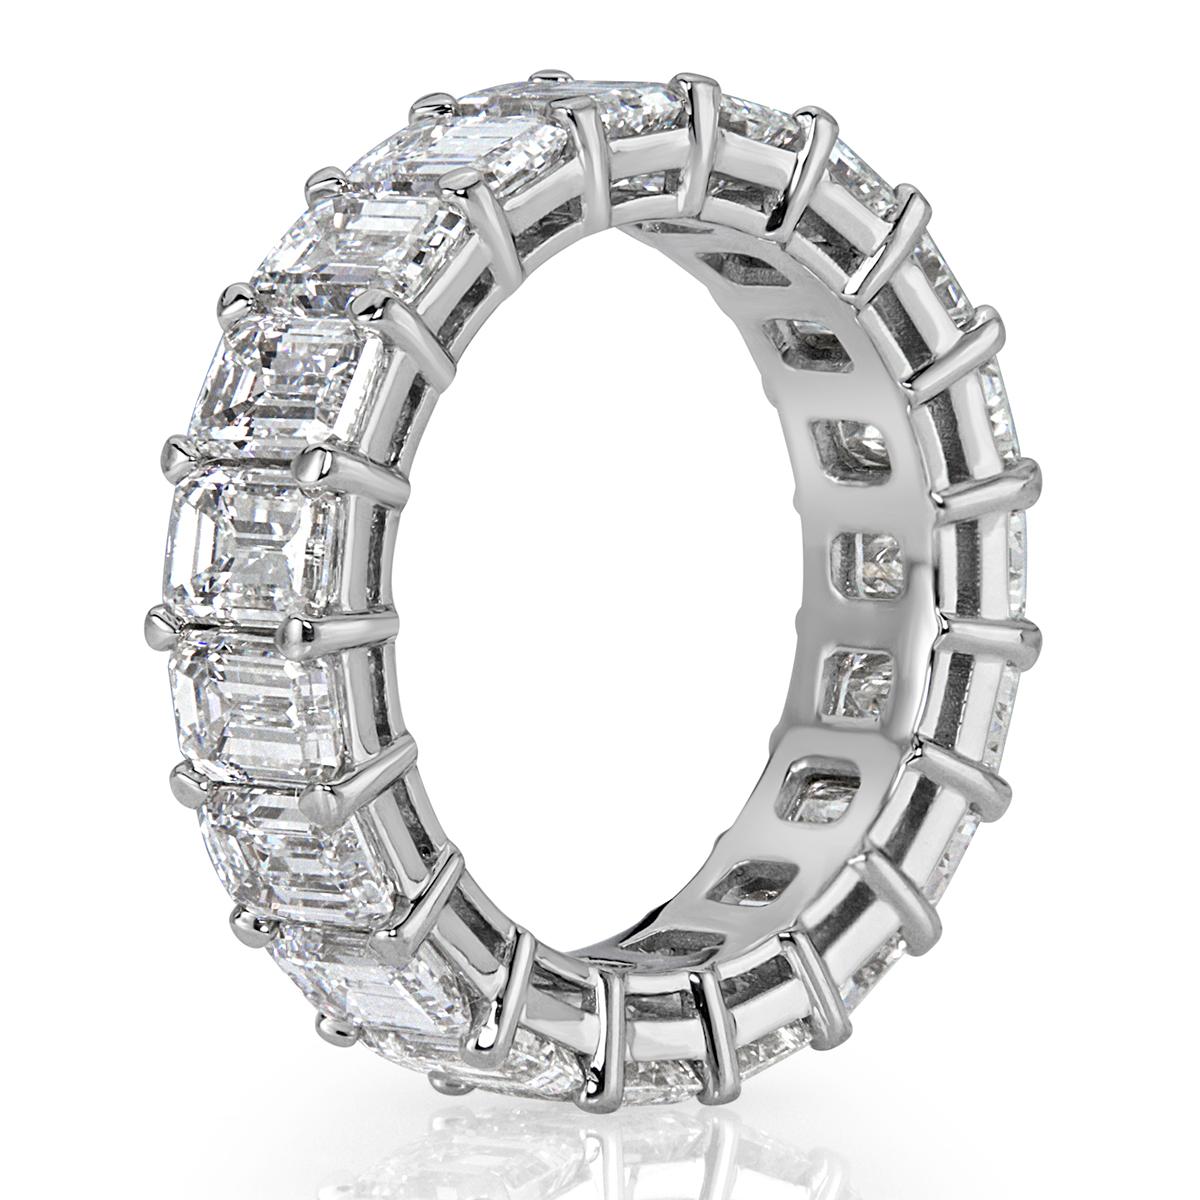 Gorgeous from every angle, this diamond eternity band features 7.82ct of emerald cut diamonds graded at E-F, VVS2-VS1. The diamonds are matched and hand set in 18k white gold. All eternity bands are shown in a size 6.5. We custom craft each eternity